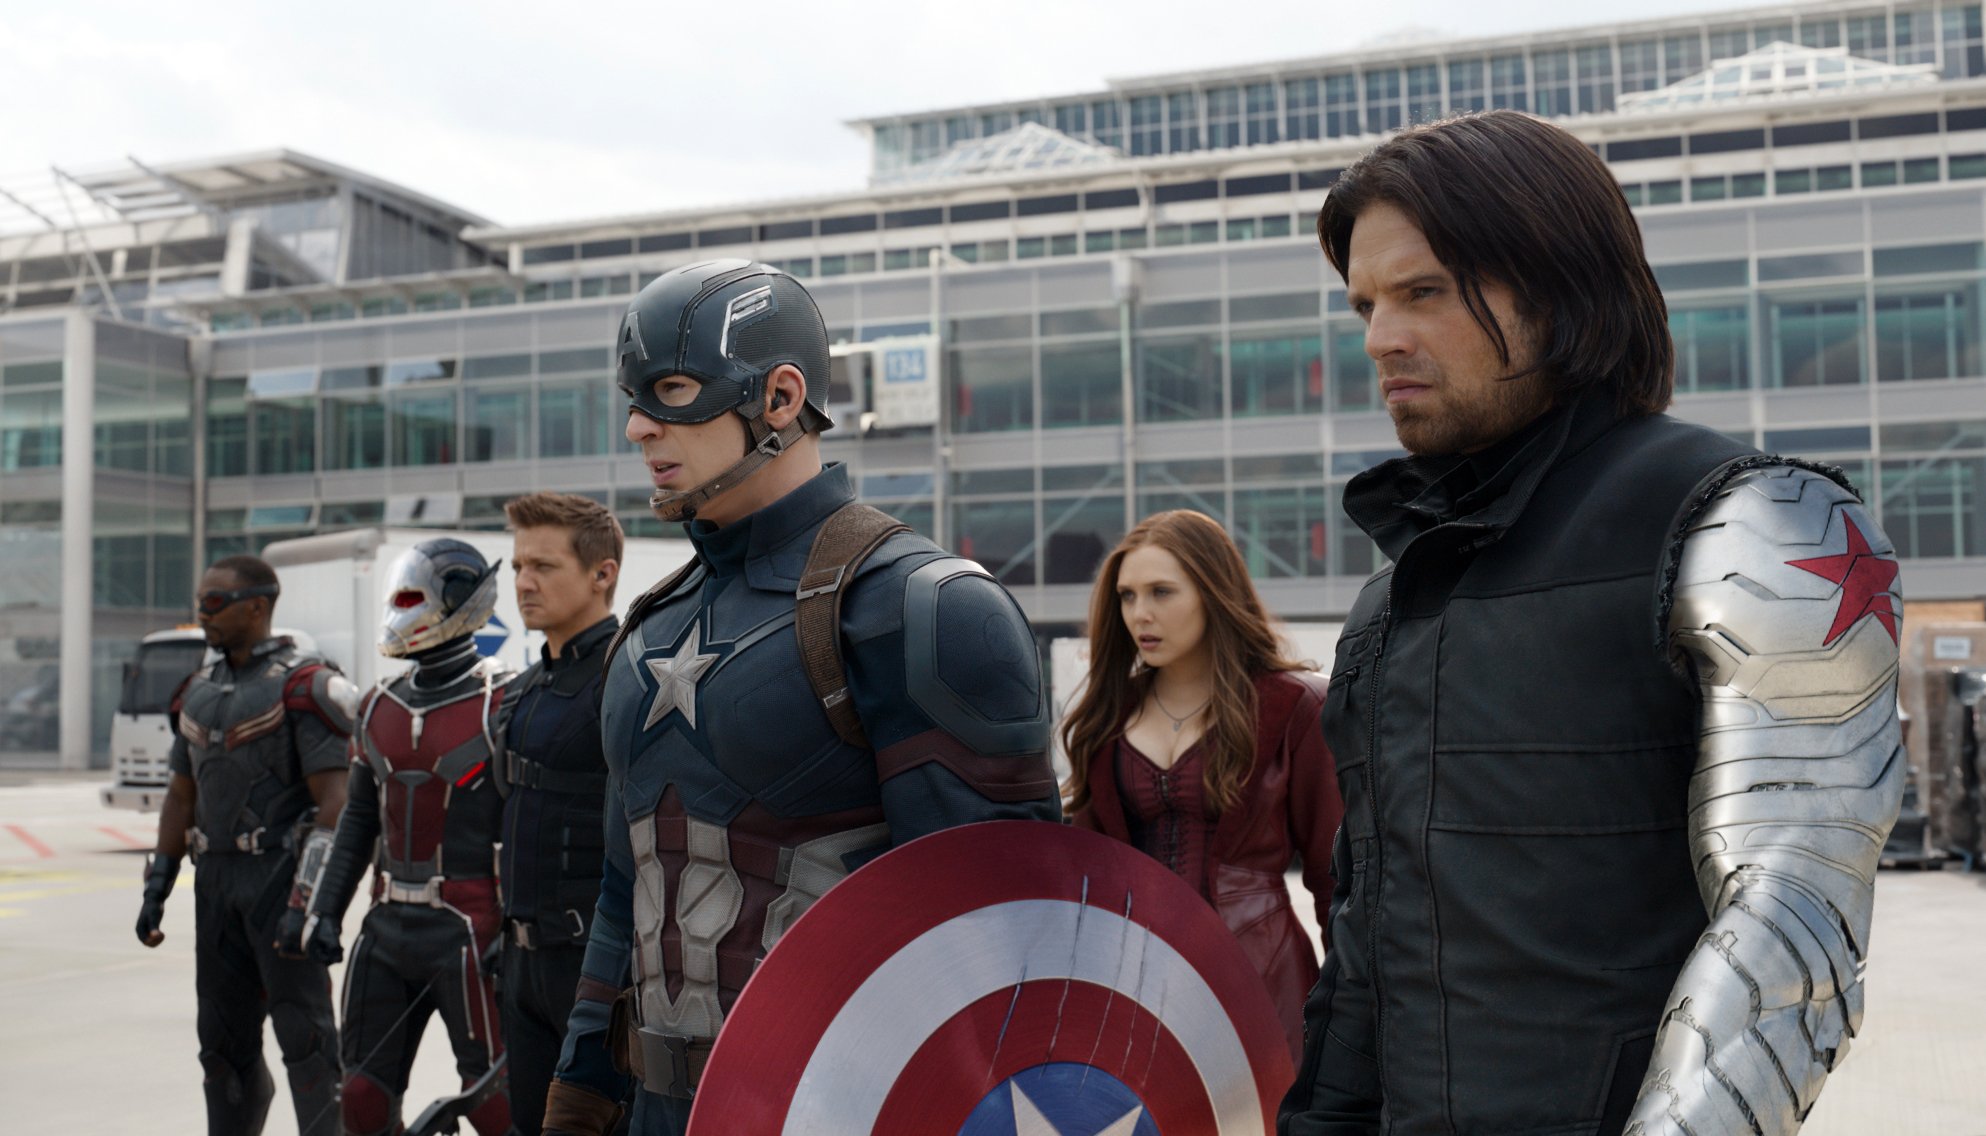 If You’ve Seen 20/39 of the Films That’ve Made Over $1 Billion, You’re a Real Movie Buff Captain America: Civil War (2016)